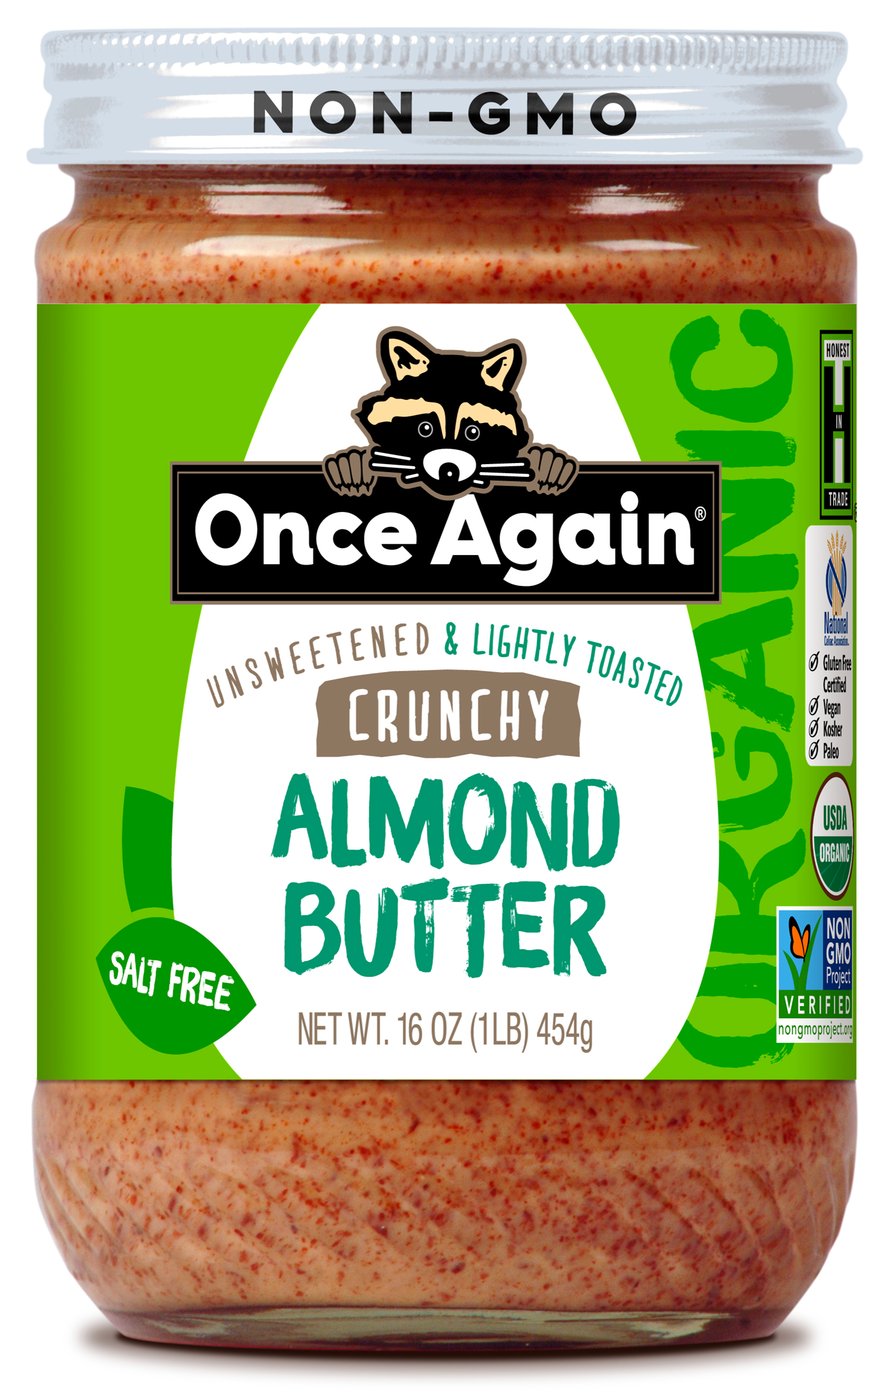 Organic Almond Butter (Lightly Toasted, Crunchy) image zoom